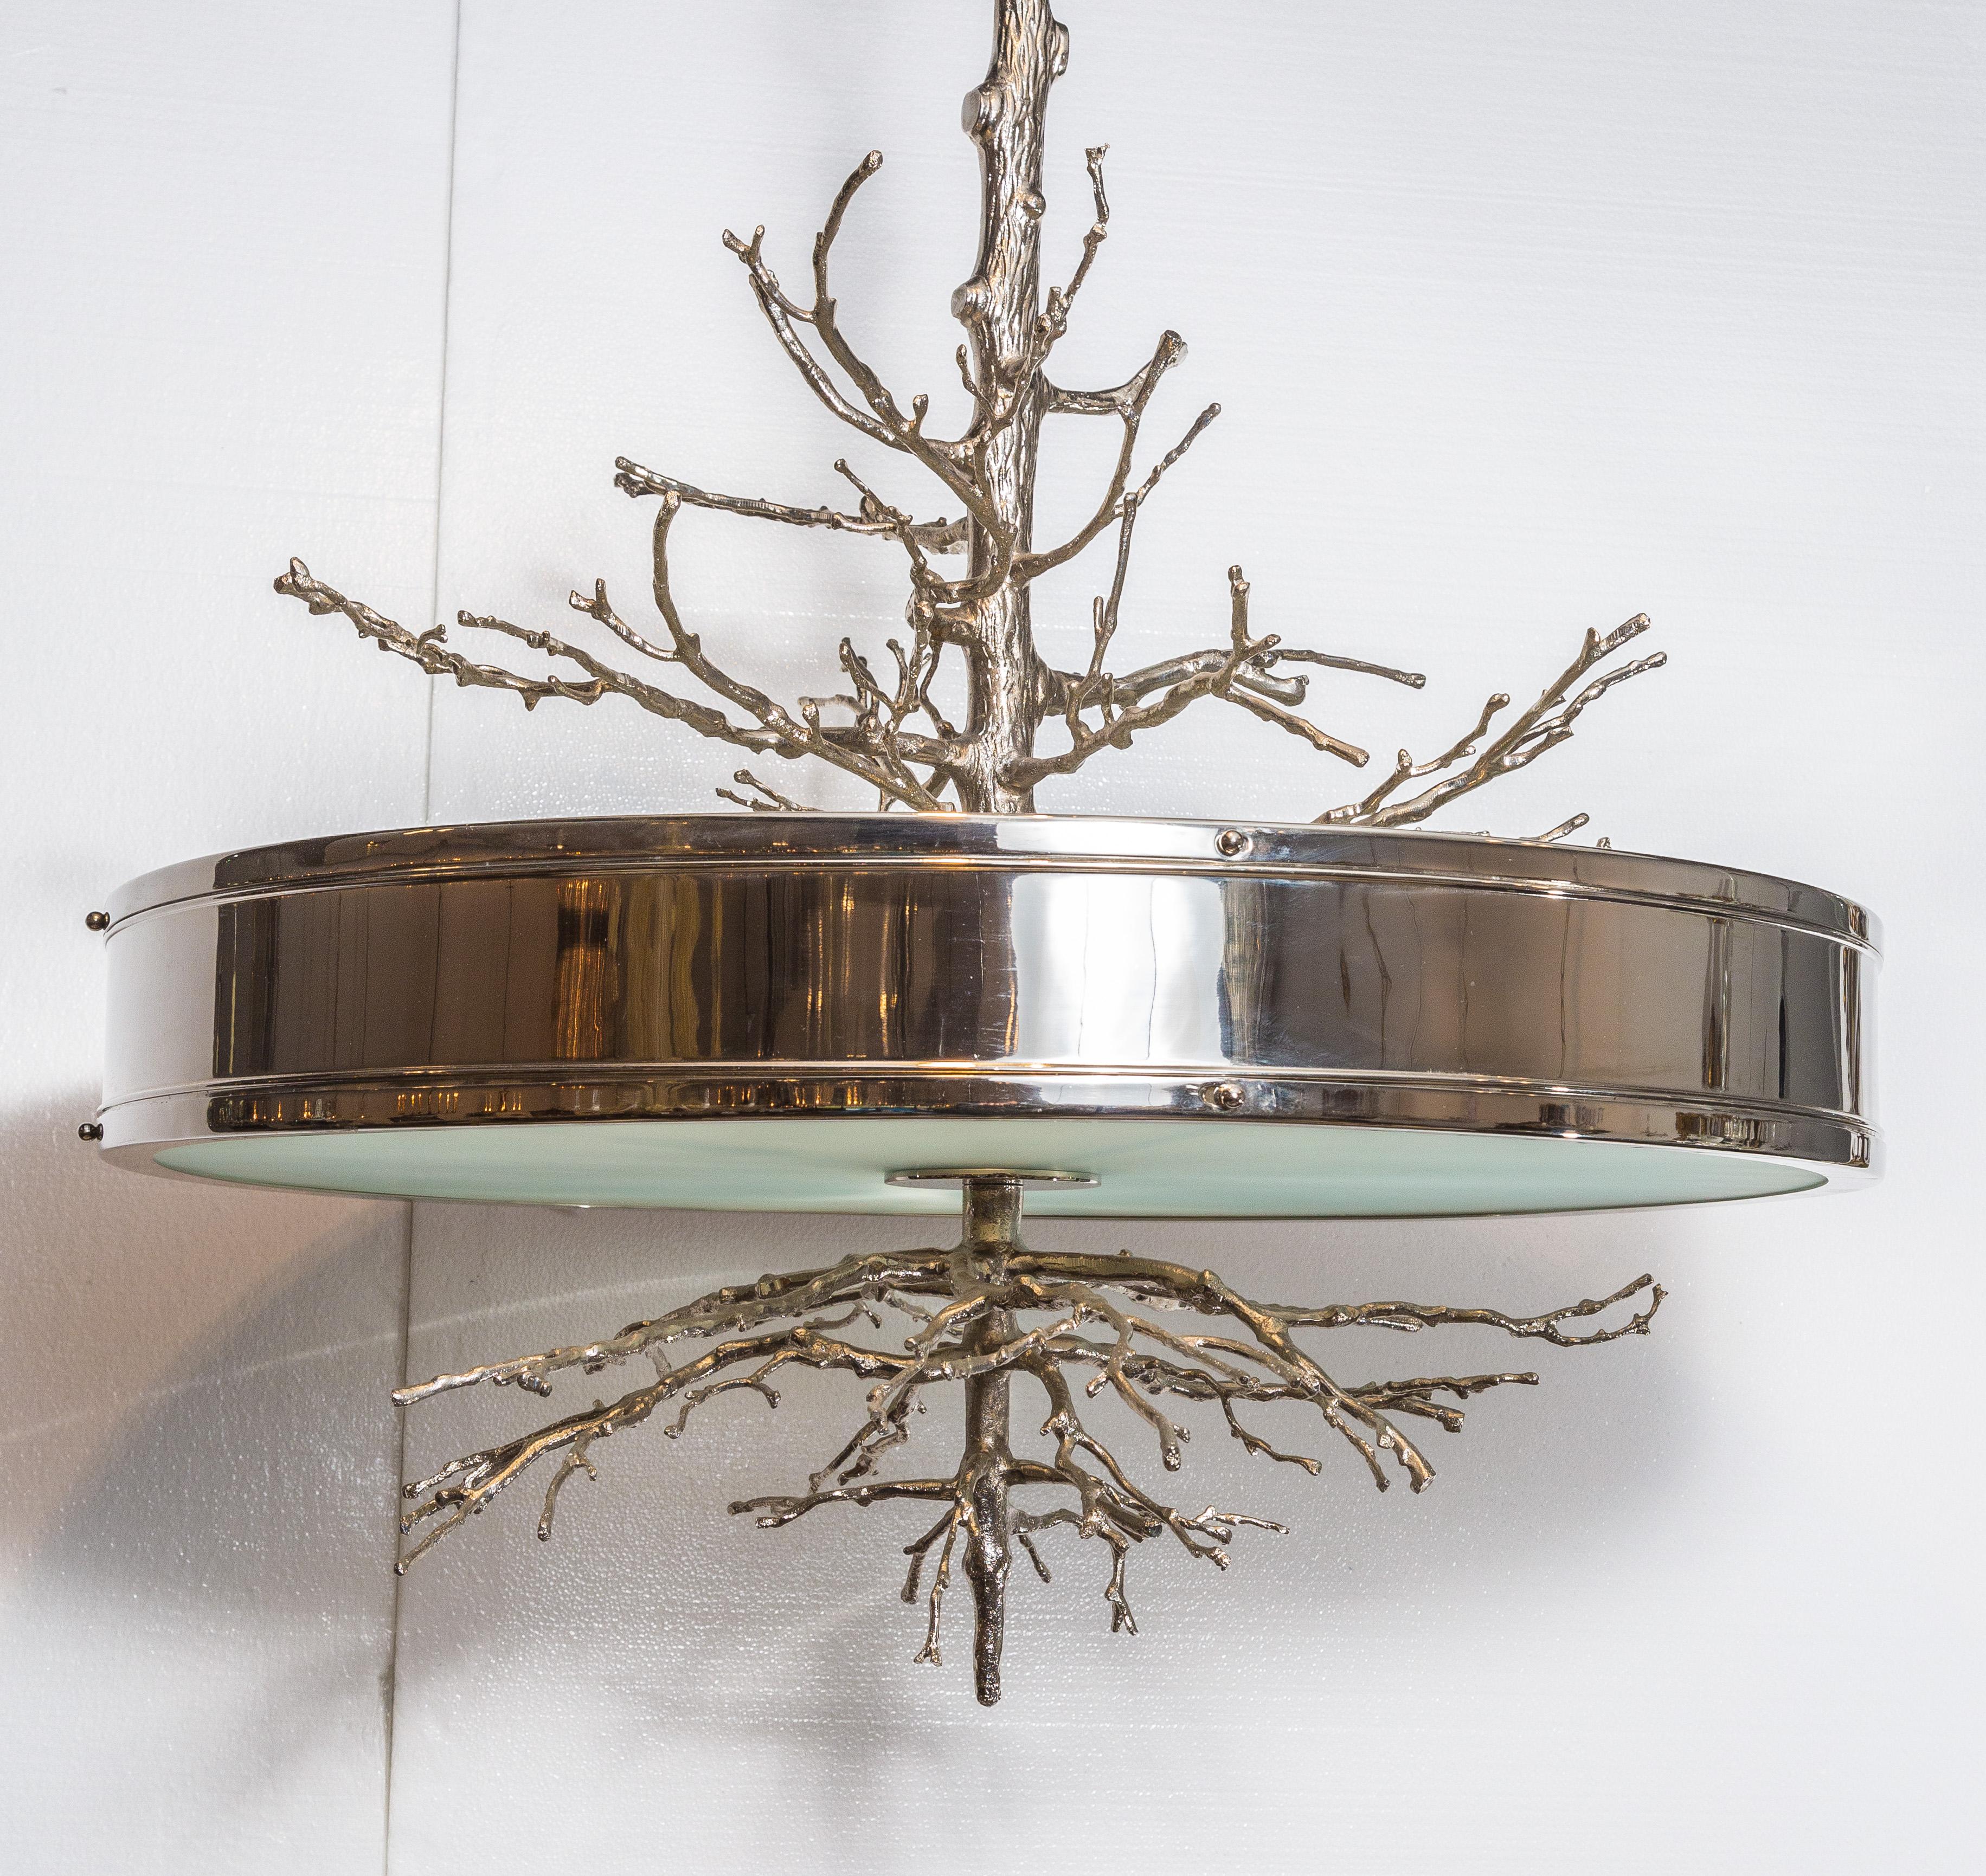 Natural handcrafted airy nickel twigs cast
from real branches, this sculpture
masterpiece includes a frosted glass
diffuser.